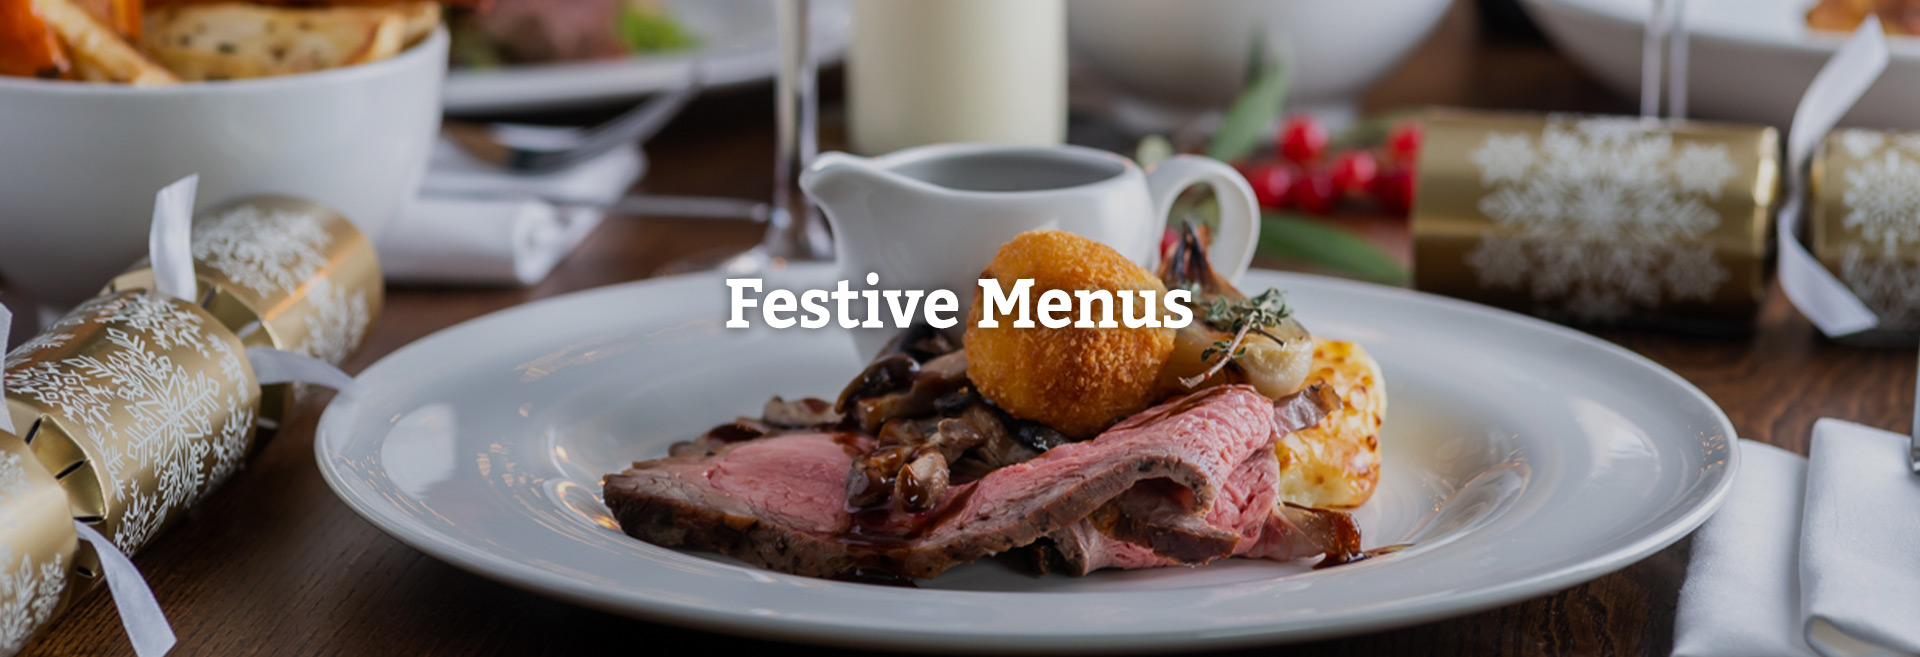 Festive Christmas Menu at The Plough on the Moor 